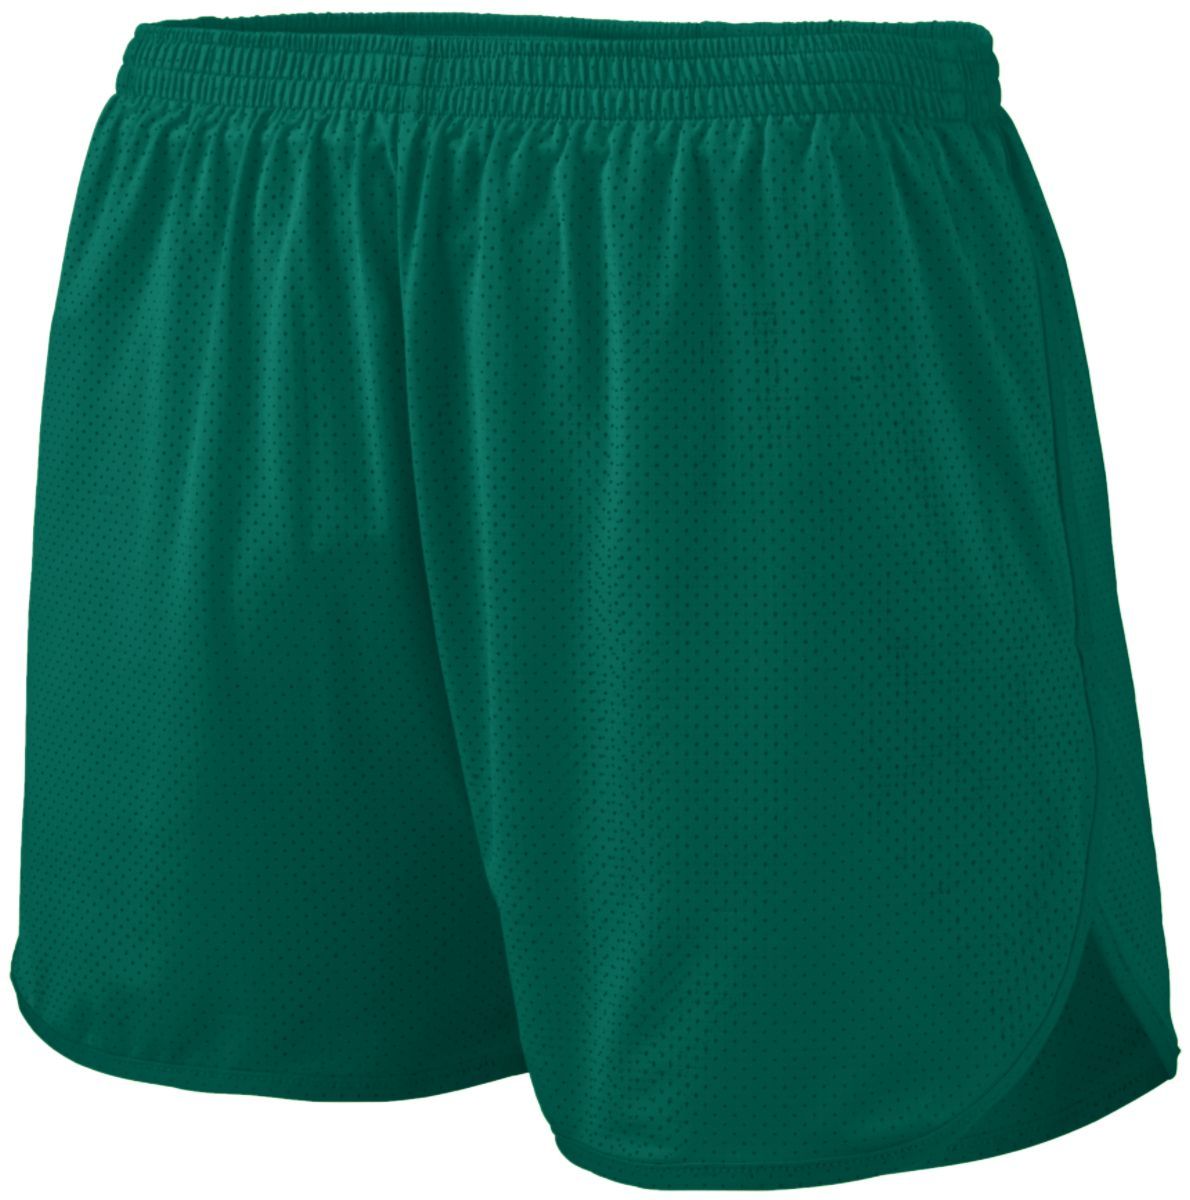 Augusta Sportswear Solid Split Shorts in Dark Green  -Part of the Adult, Adult-Shorts, Augusta-Products, Track-Field product lines at KanaleyCreations.com